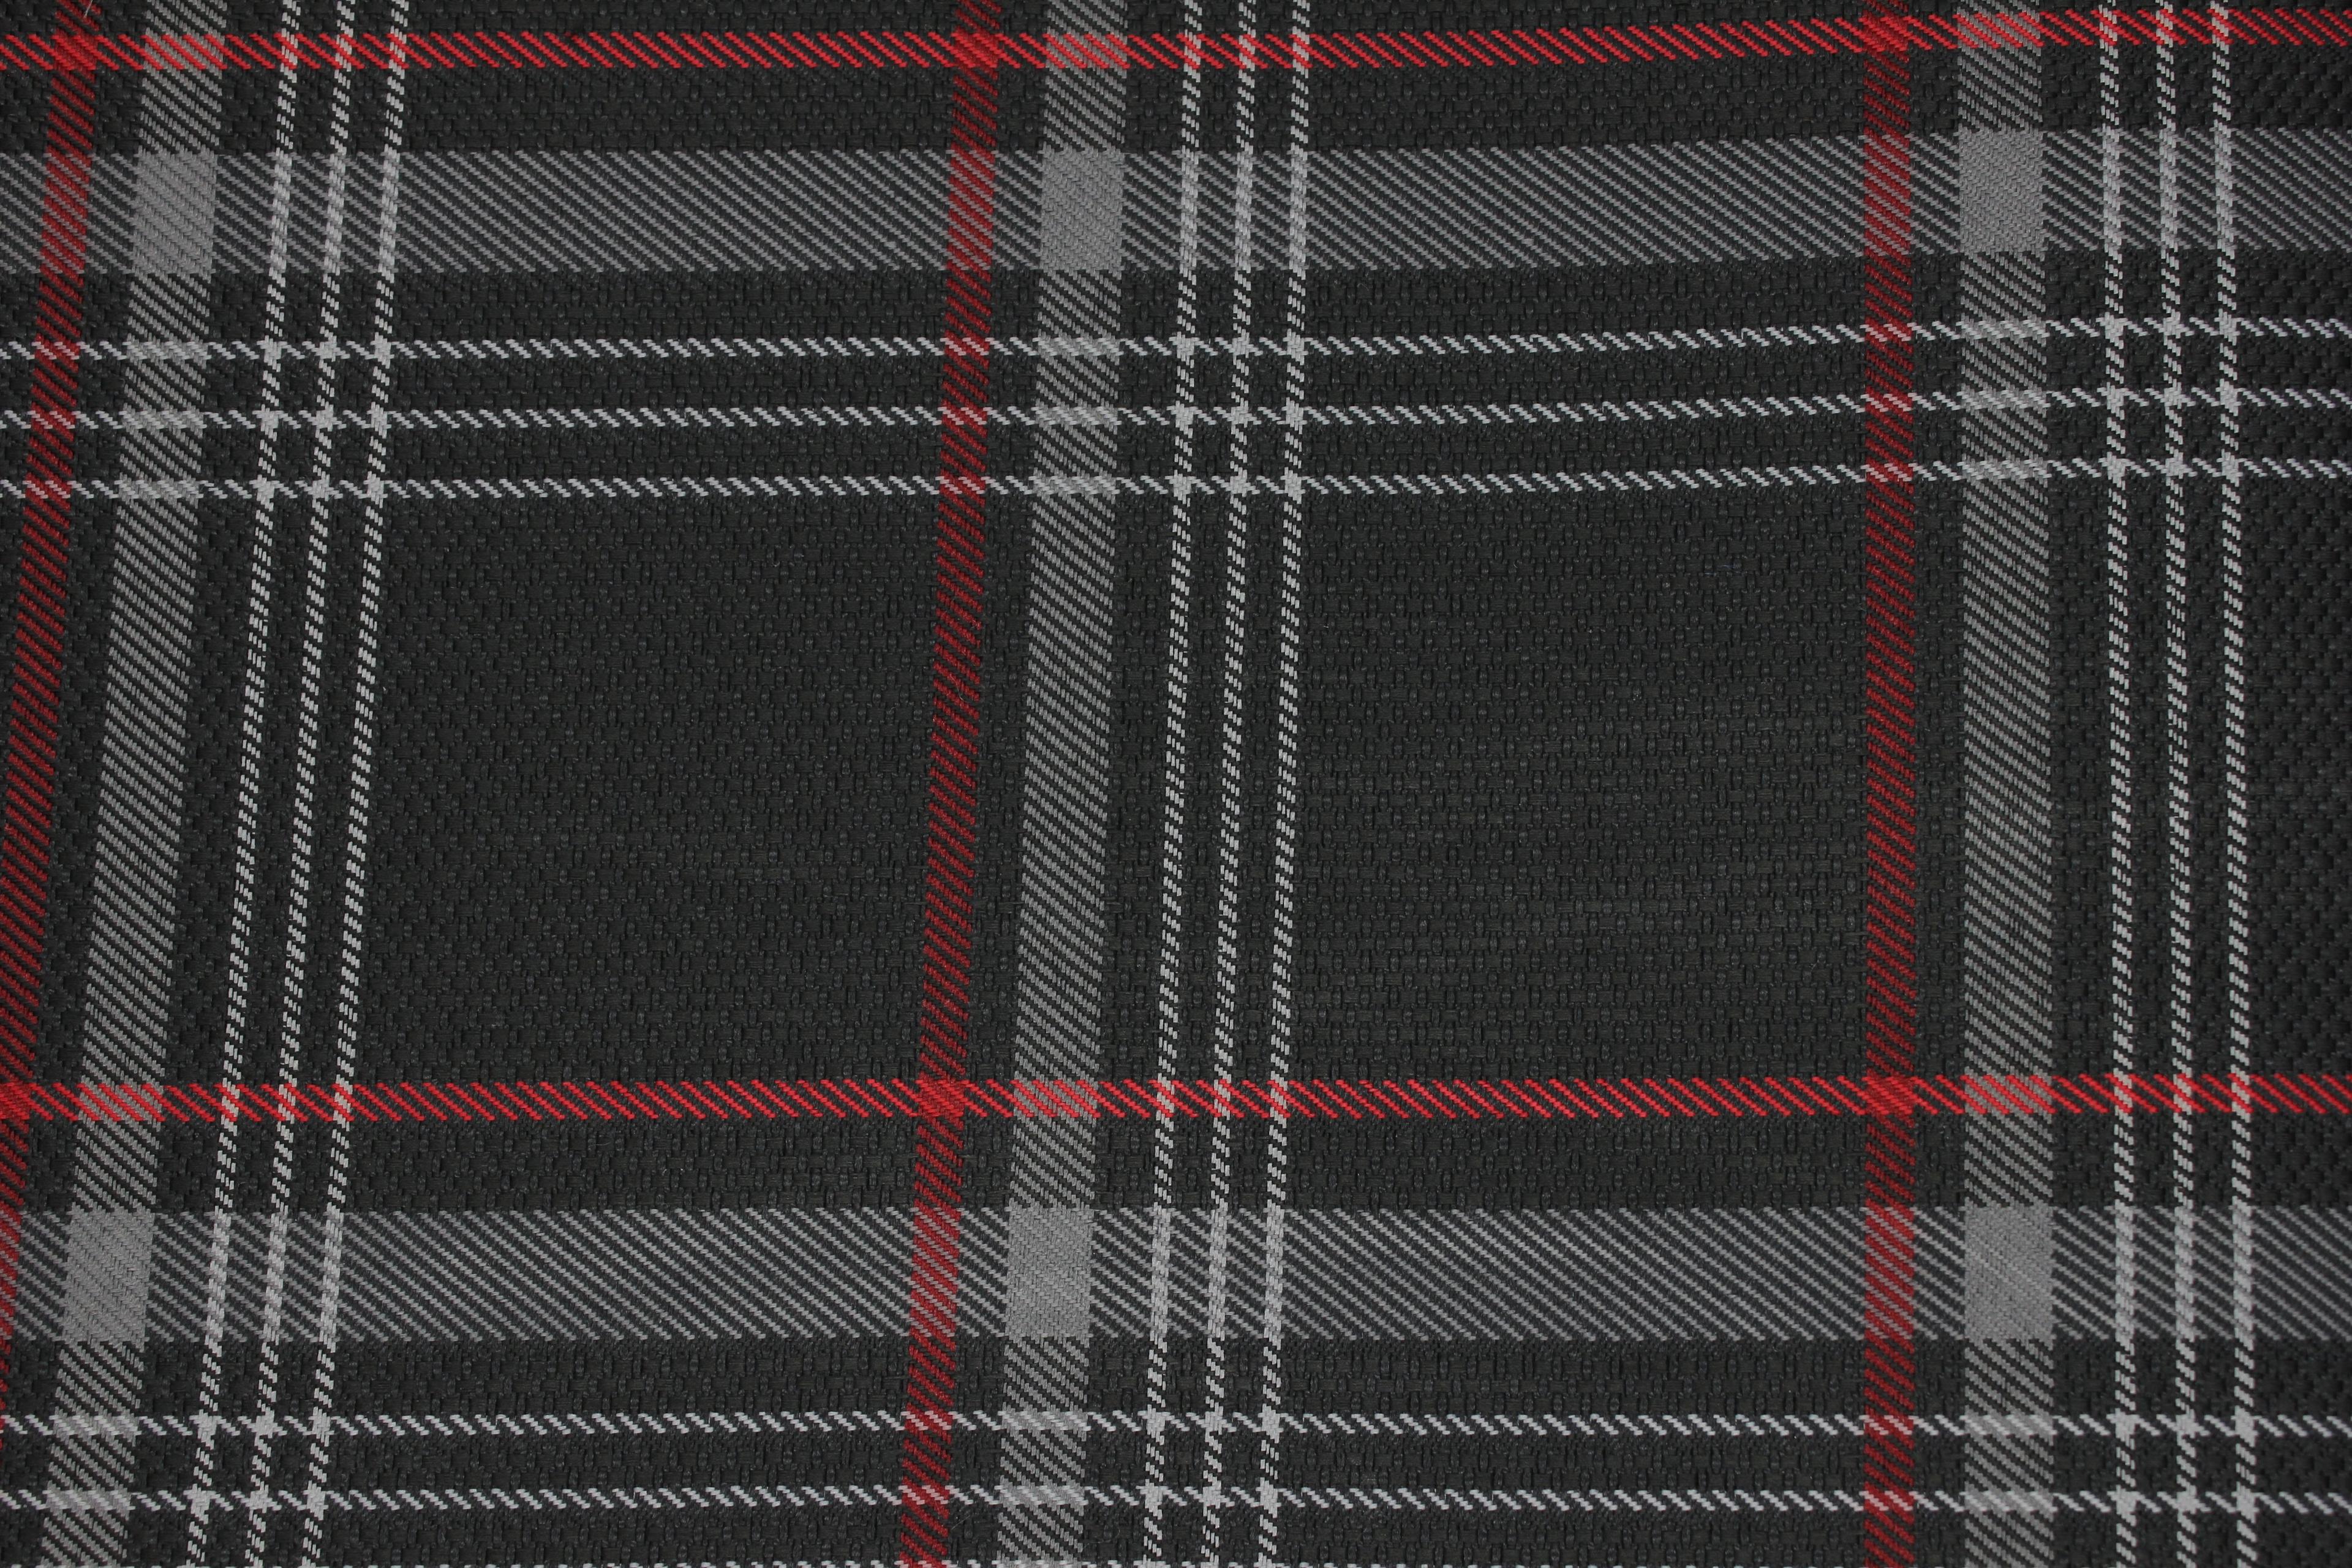 GTI Red Plaid Car Upholstery Fabric - VW Golf MK7- 3.5mm Comfort Foam - 59" - 150CM - Tartan Chic - Ideal for Seat, Interior, Automobile